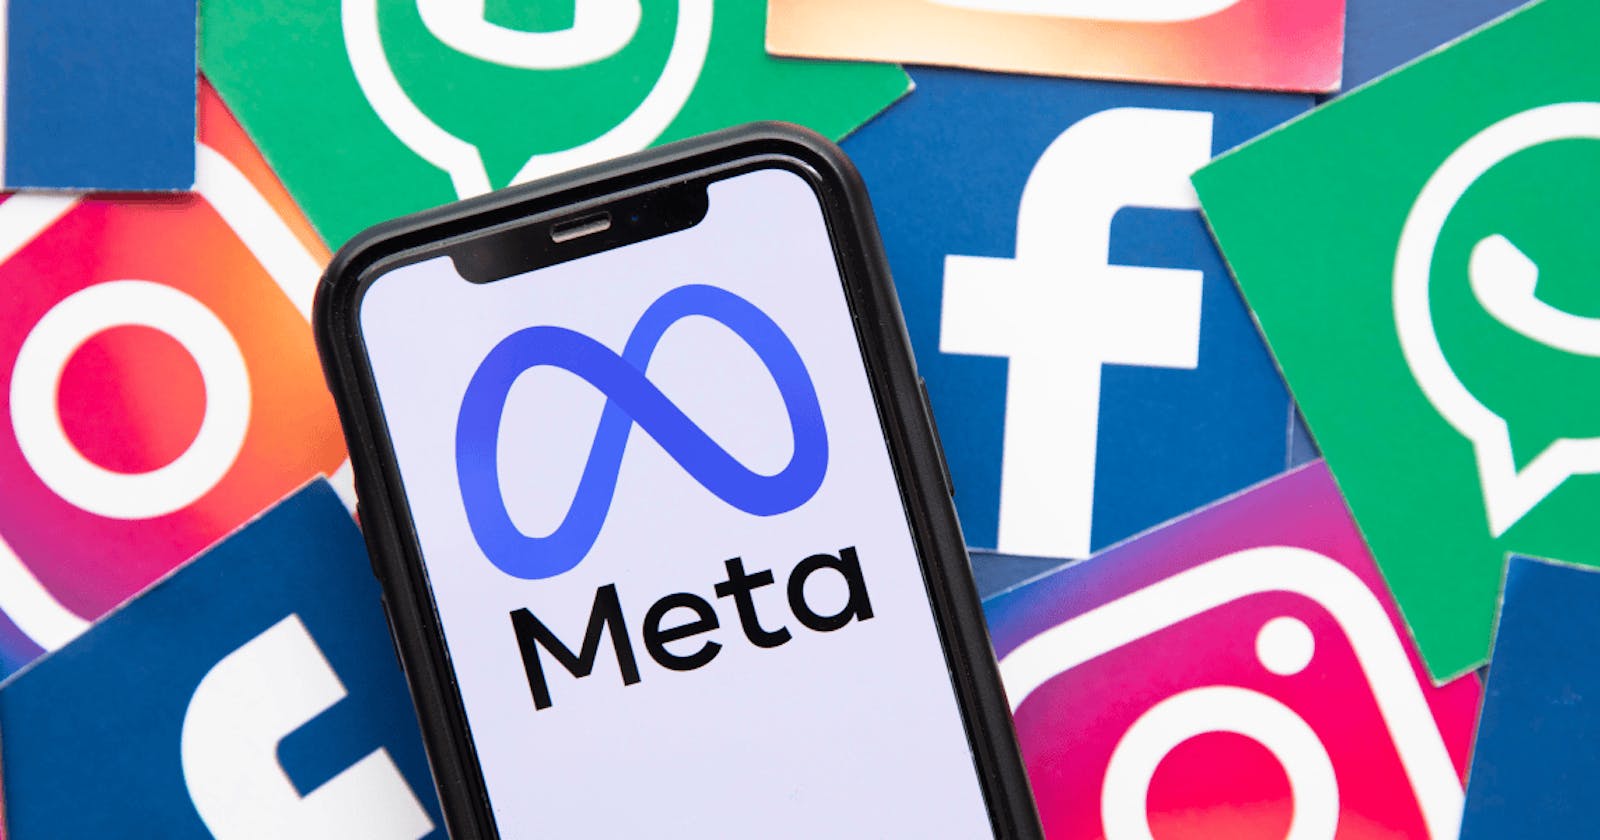 Meta’s value jumps 20%+, adding ~$200B, the biggest one-day market cap gain, beating Apple’s and Amazon’s $190B records in 2022